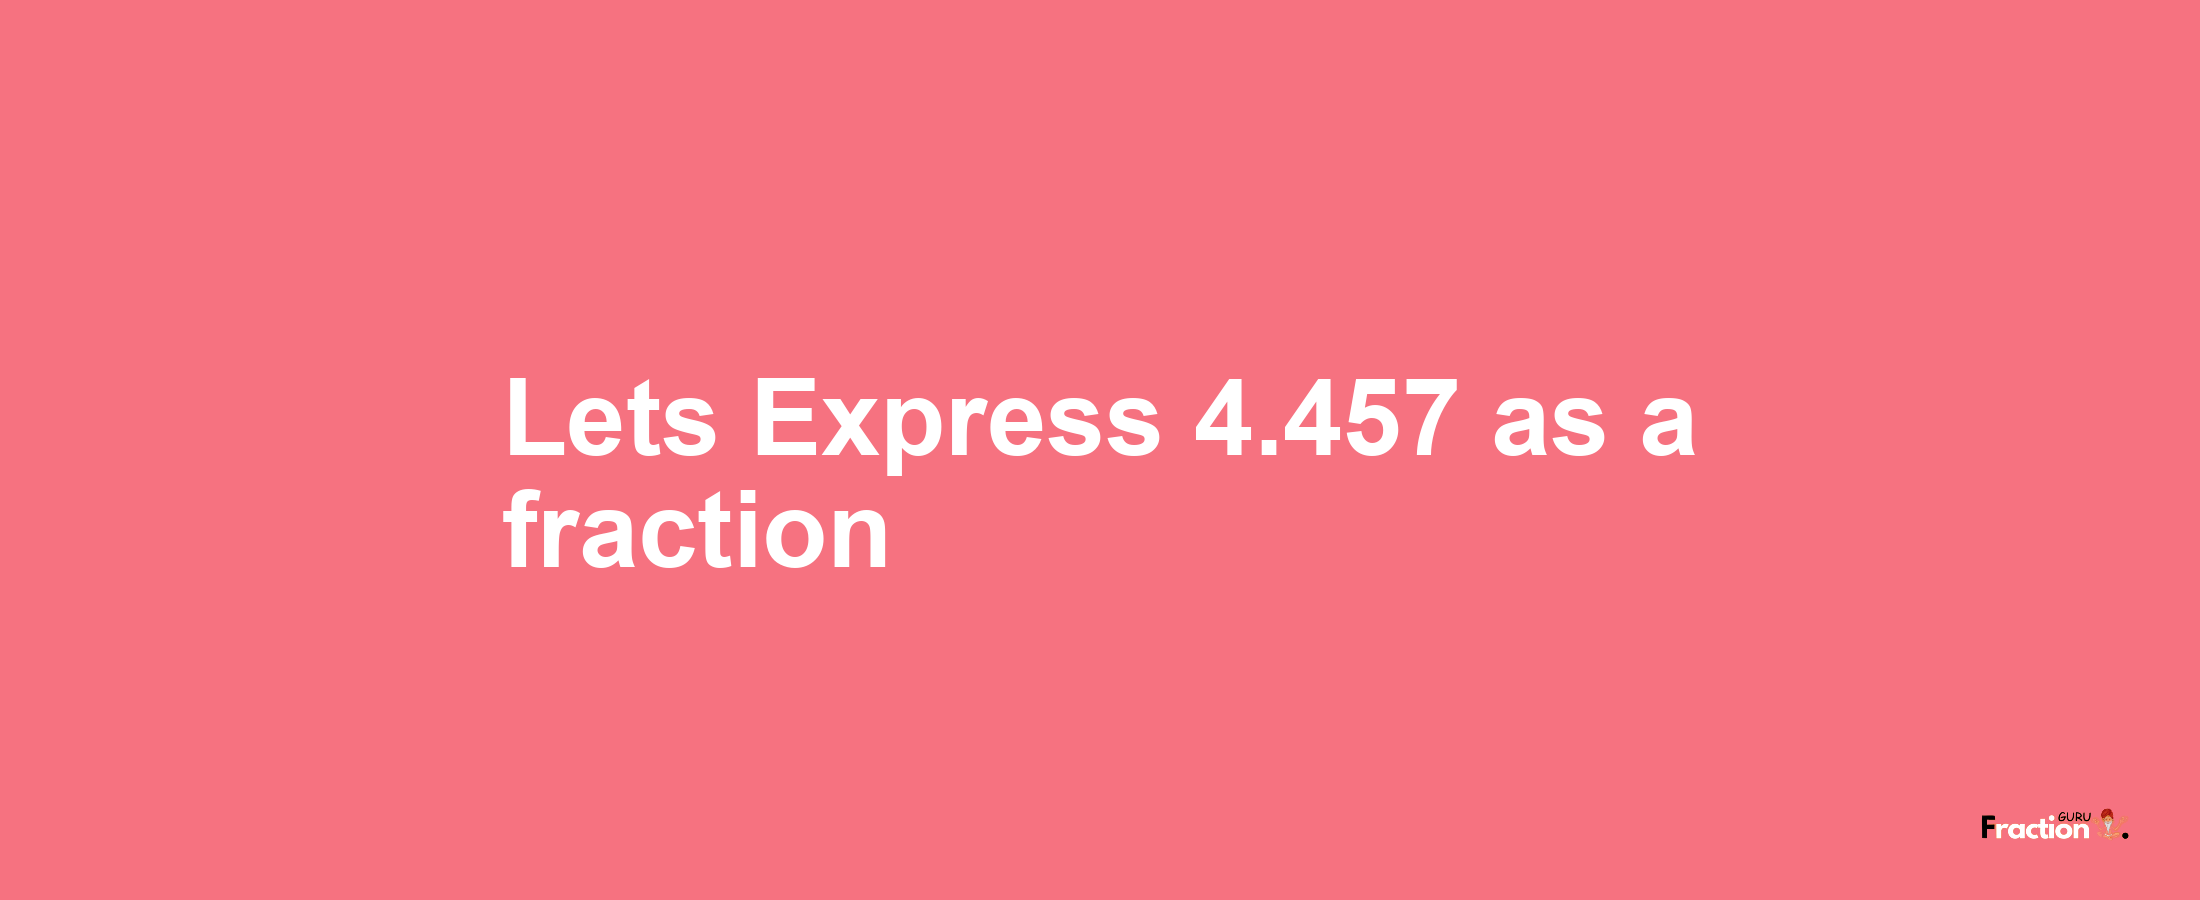 Lets Express 4.457 as afraction